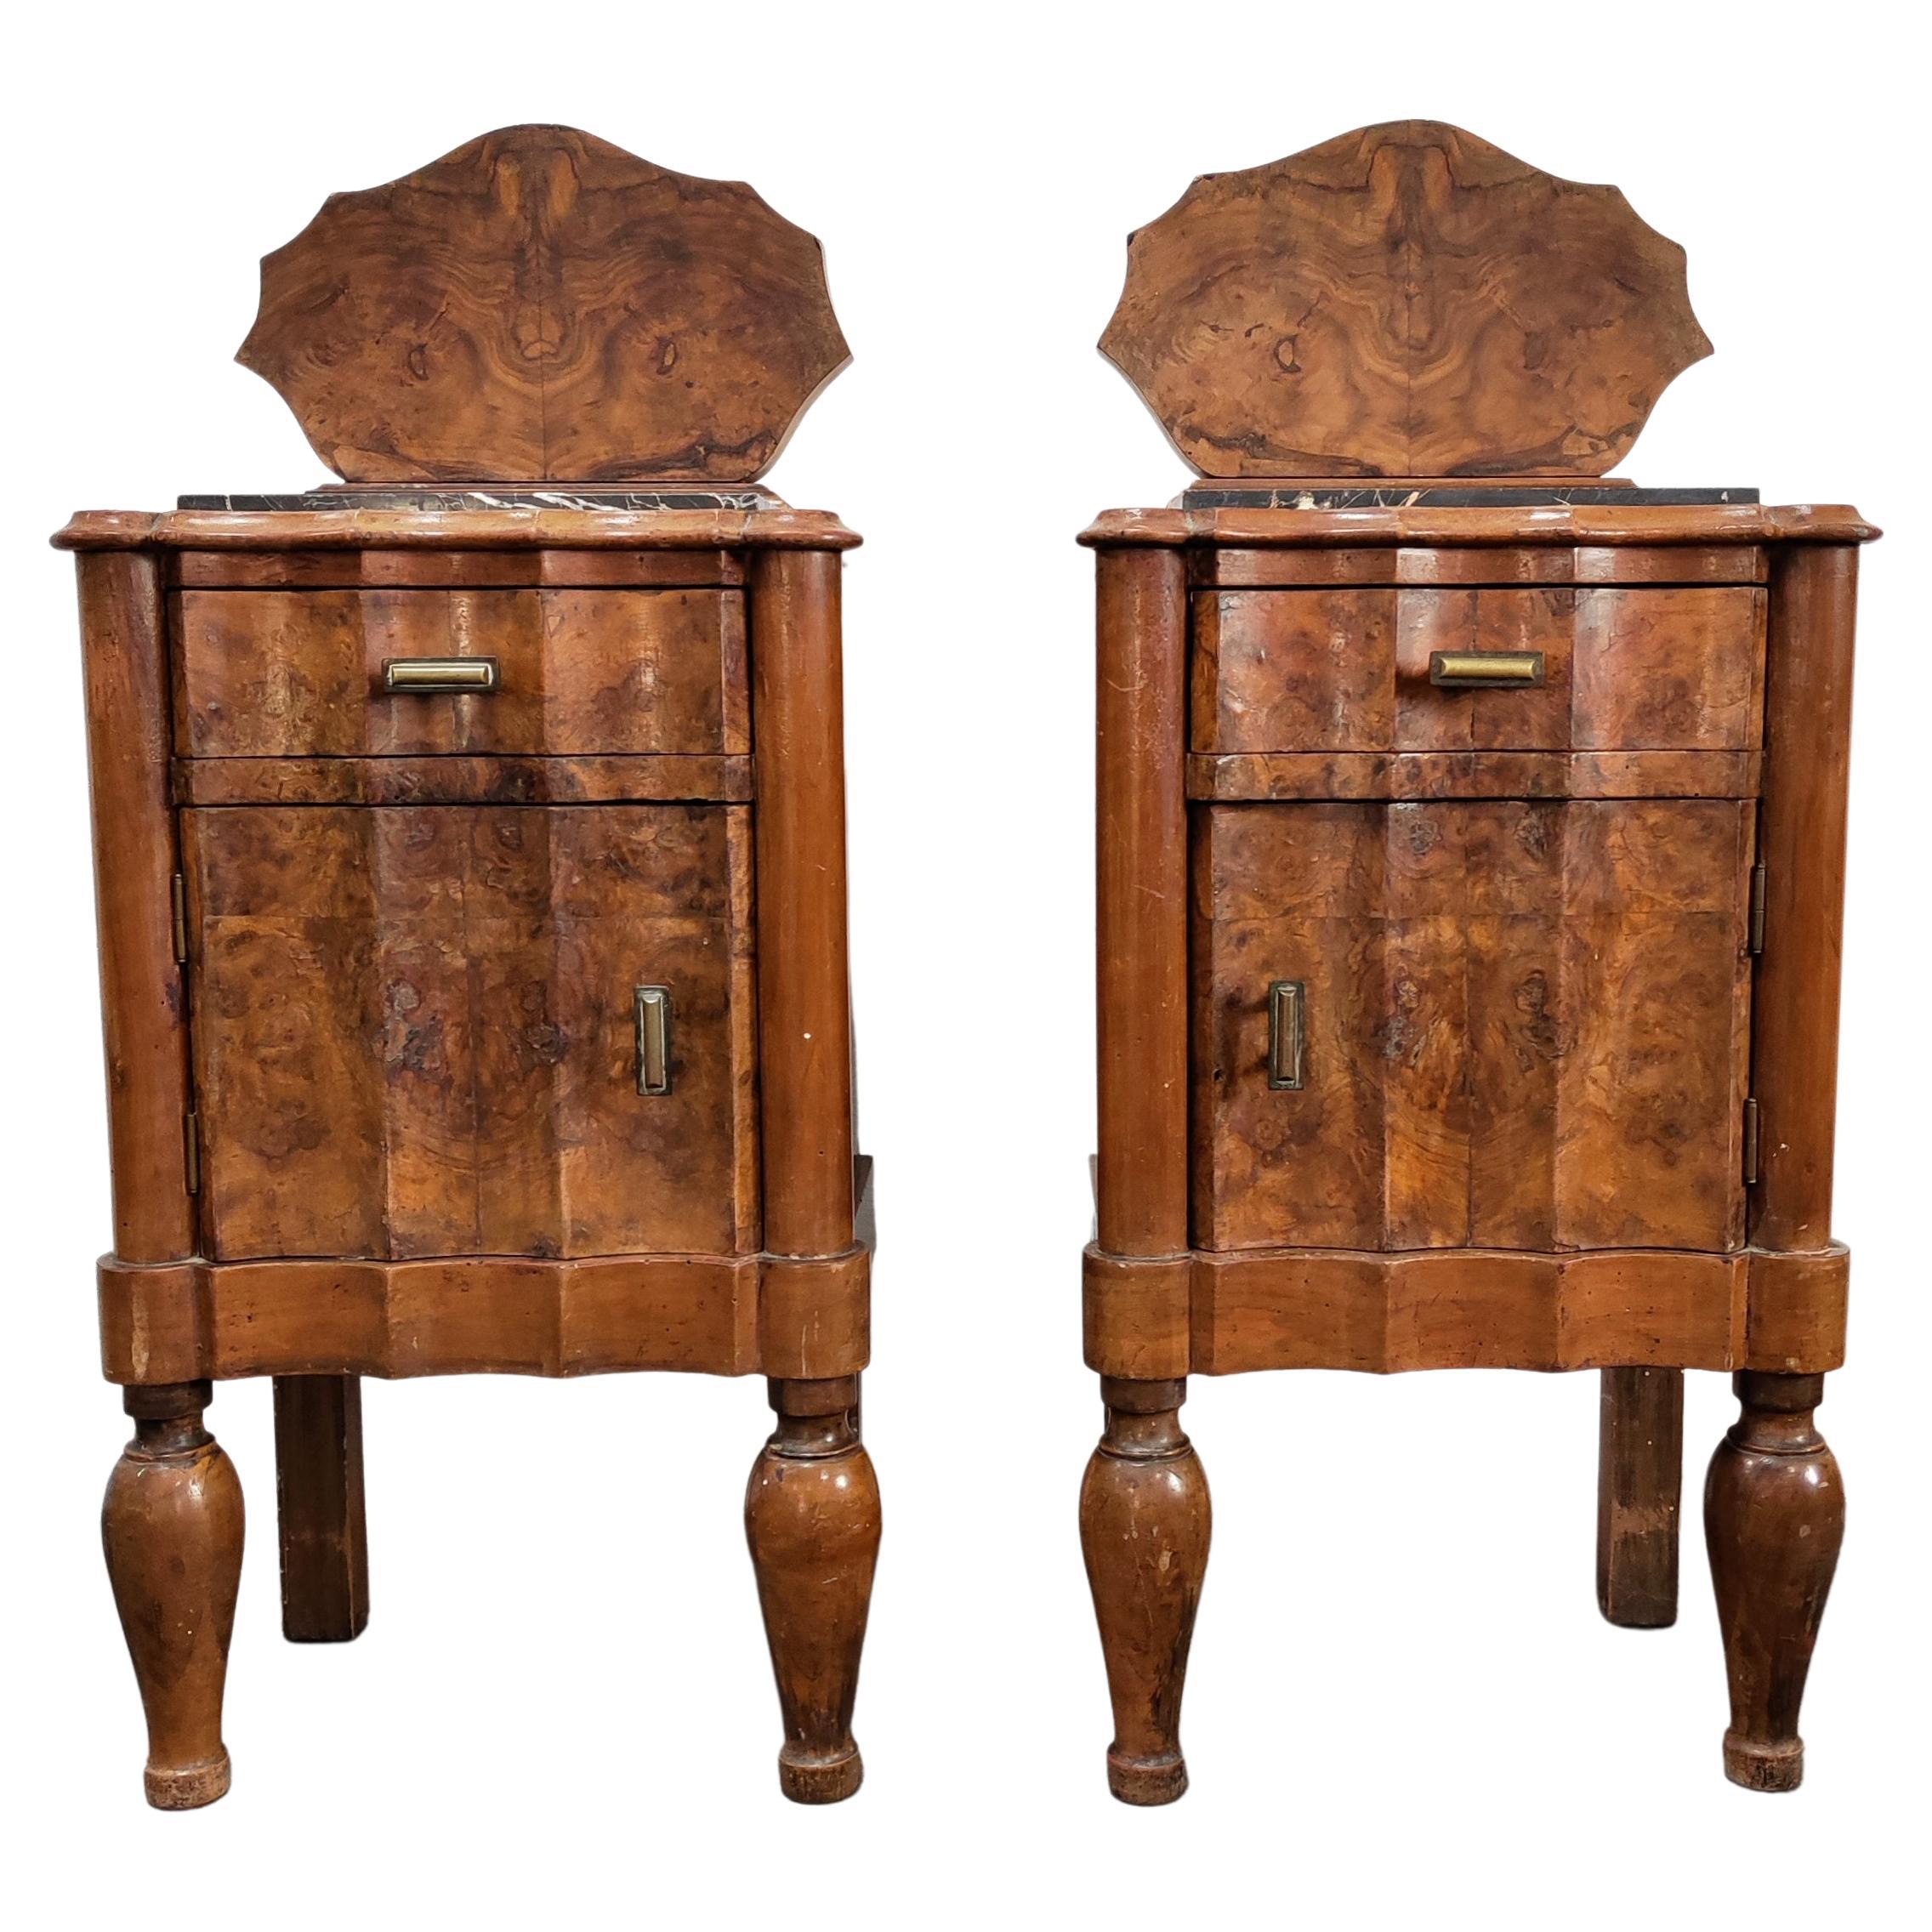 Pair of Pettite Art Deco Nightstands in Walnut Burl and Marble, Italy, 1920s